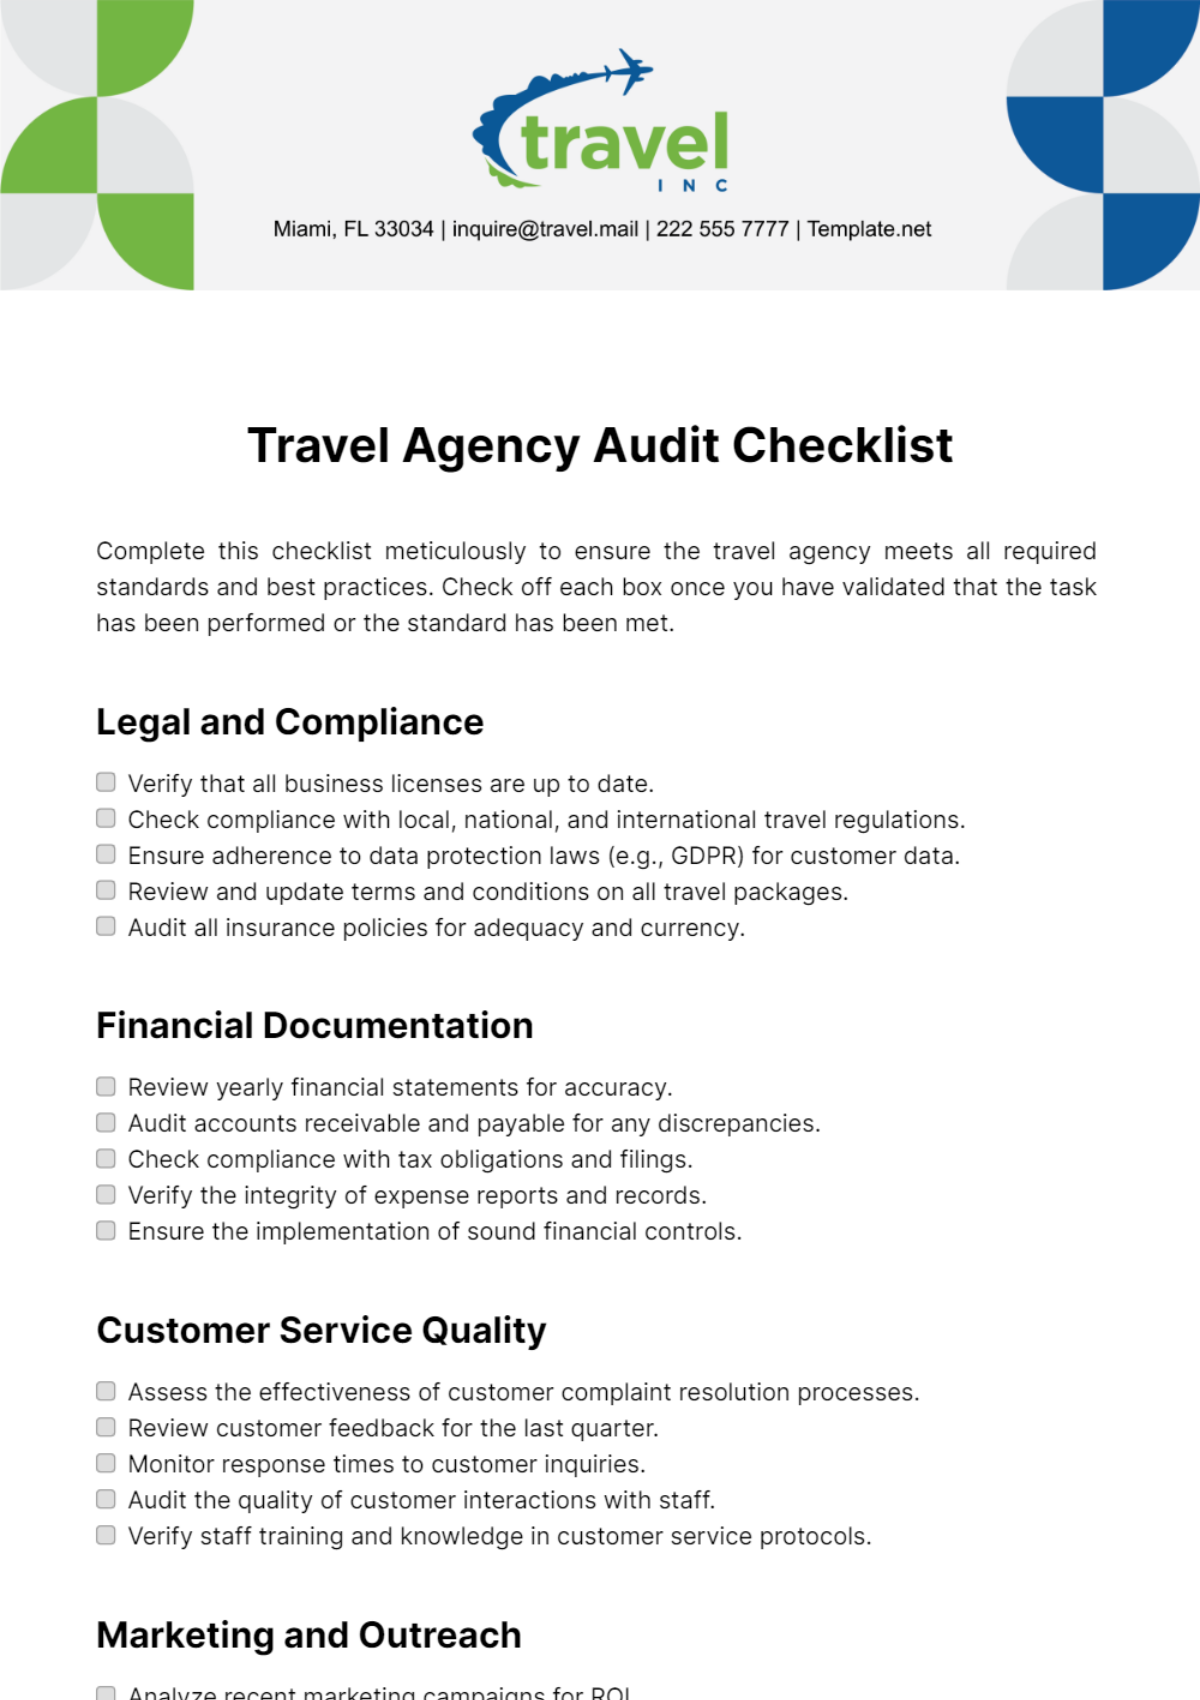 Travel Agency Audit Checklist Template